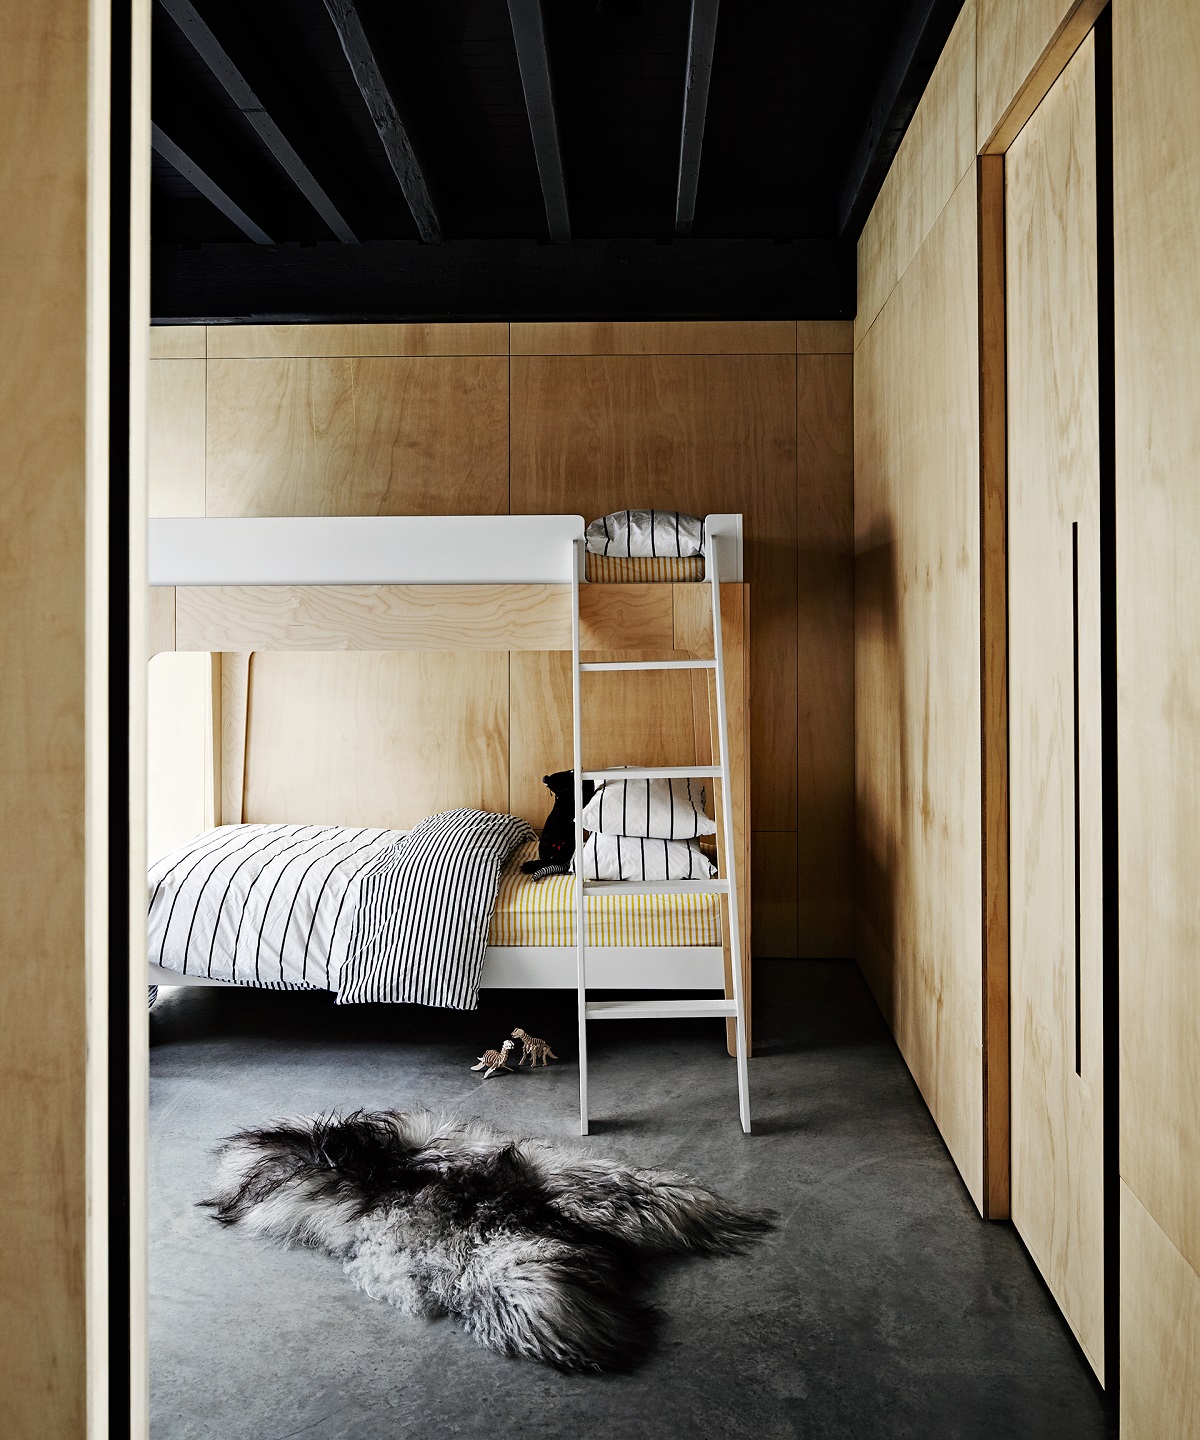 At the former home of comedian Merrick Watts, heated polished concrete floors and a sheepskin rug created a super cozy kid's room. The bunk bed is decorated with bedlinen from Unison.